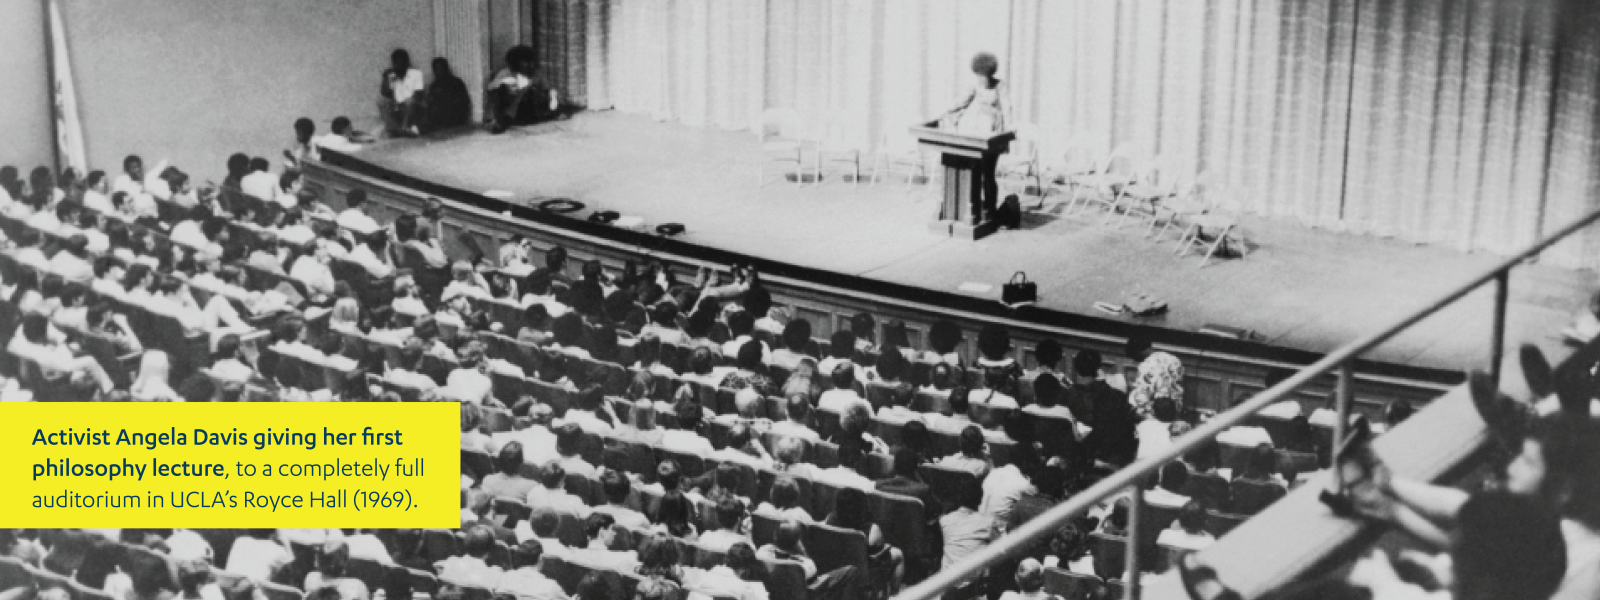 "Activist Angela Davis giving her first philosophy lecture to a completely full auditoriumn in UCLA's Royce Hall (1969)."